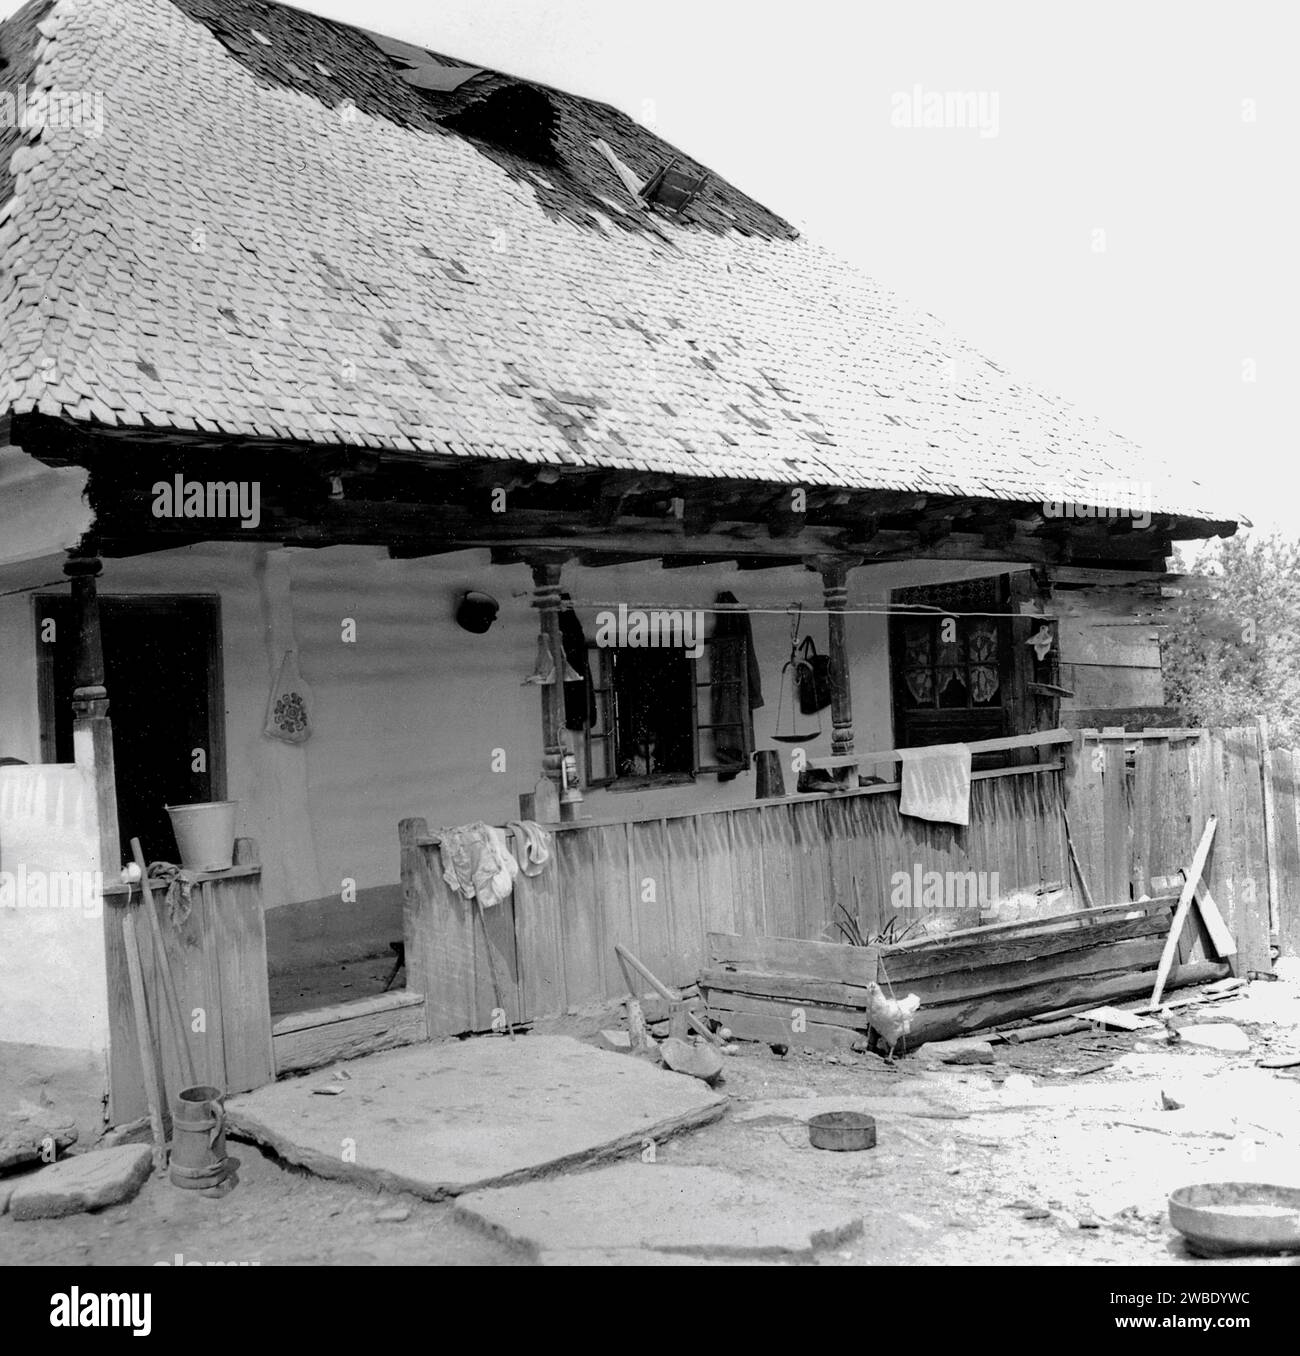 Vrancea County, Socialist Republic of Romania, approx. 1978. Exterior of a traditional rural house with wood shingle roof. Stock Photo